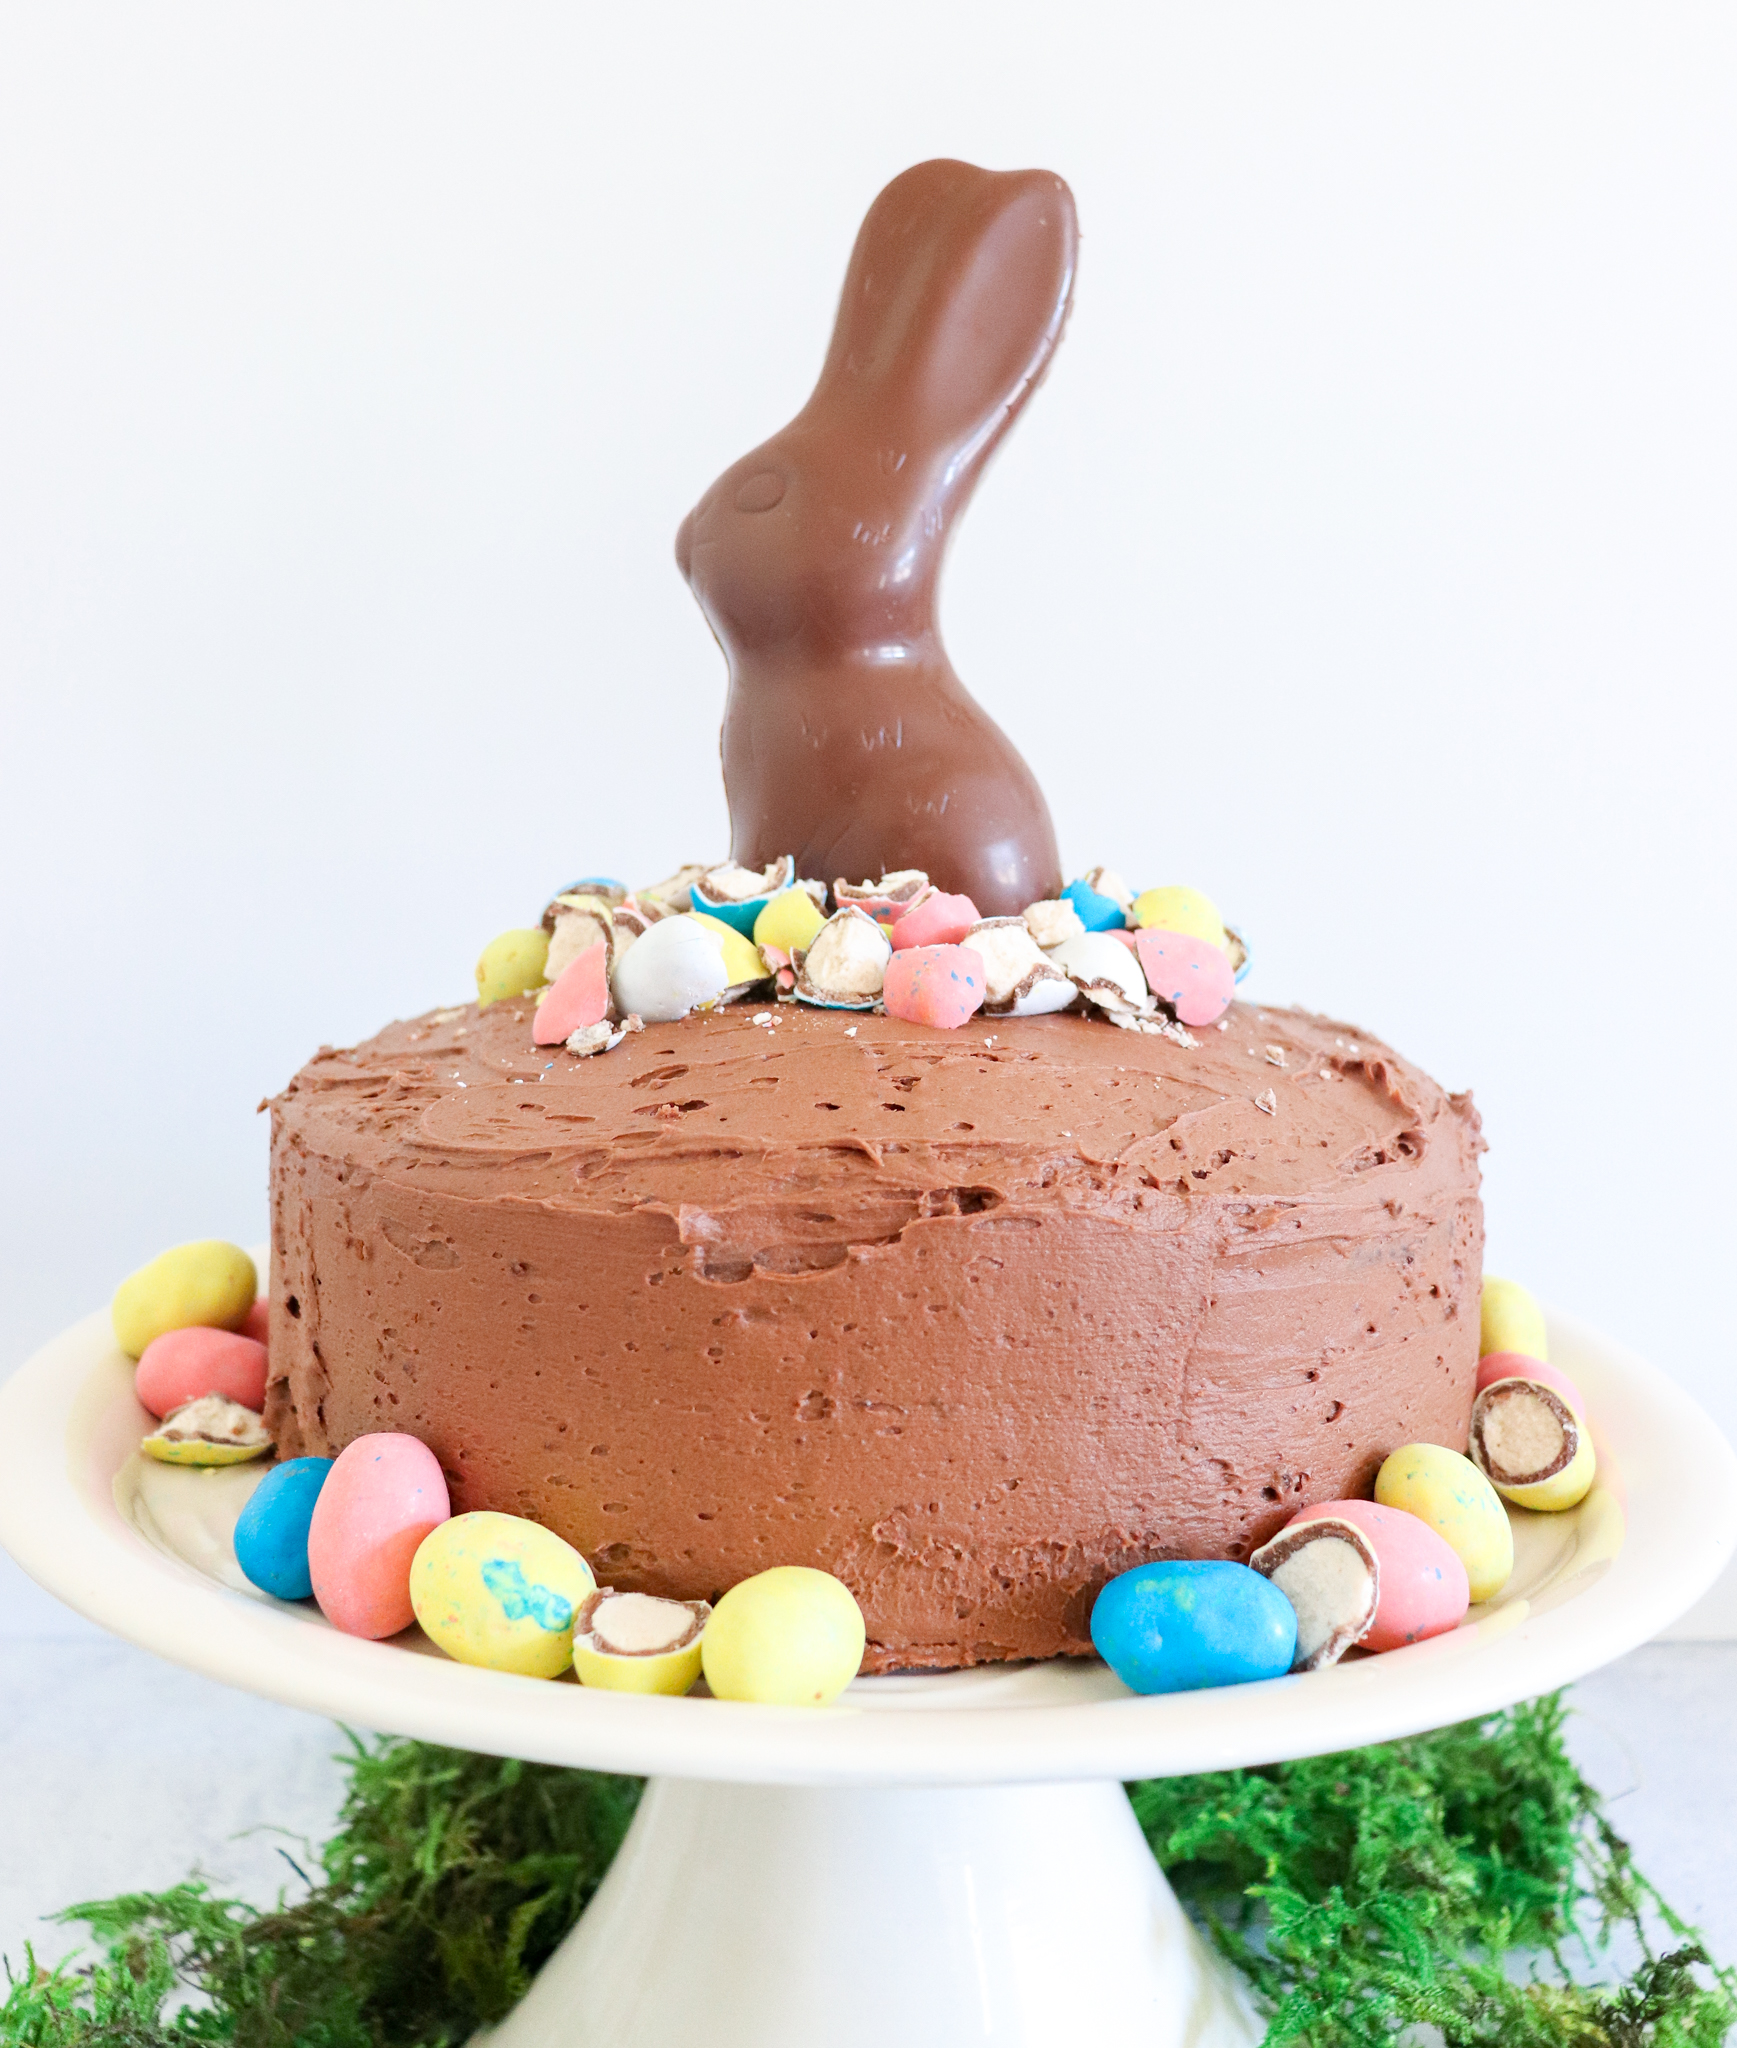 Chocolate Frosting Recipe + How To Dress Up A Box Cake For Easter